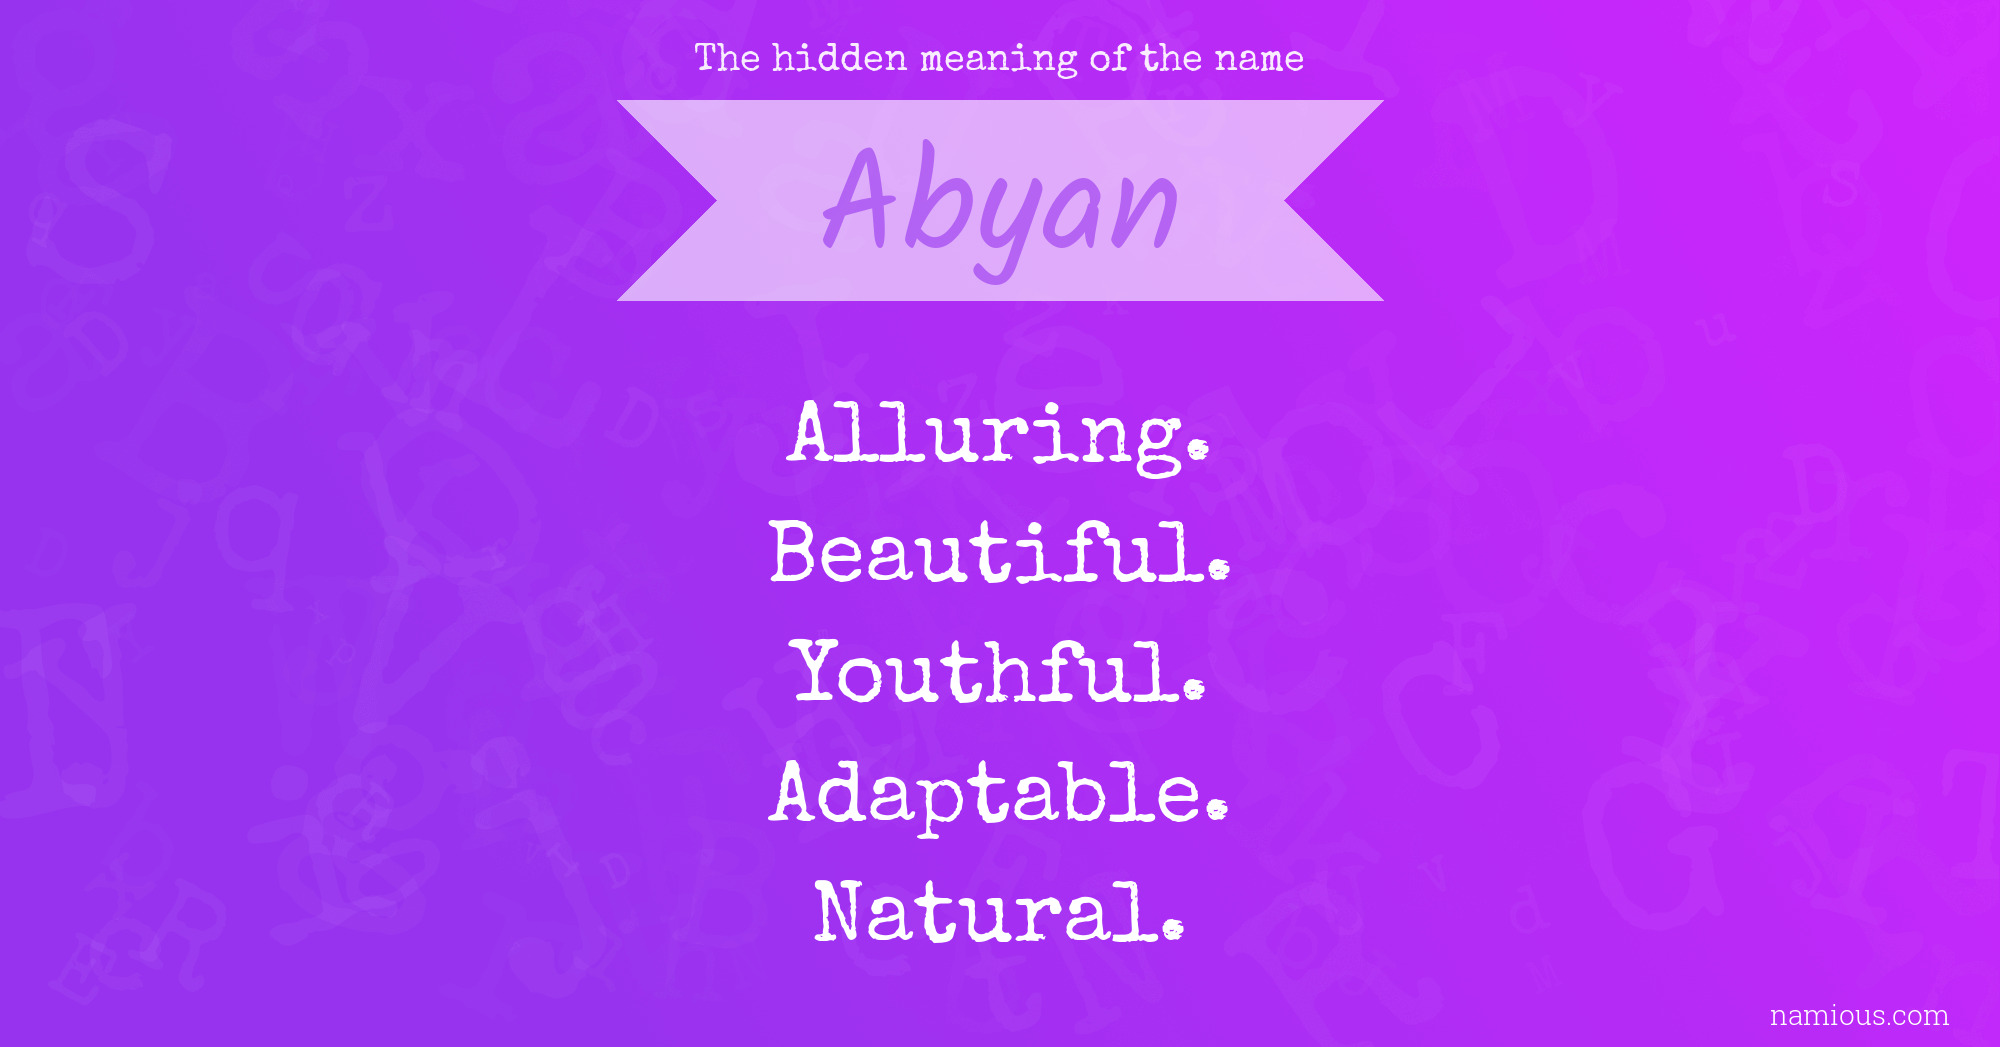 The hidden meaning of the name Abyan